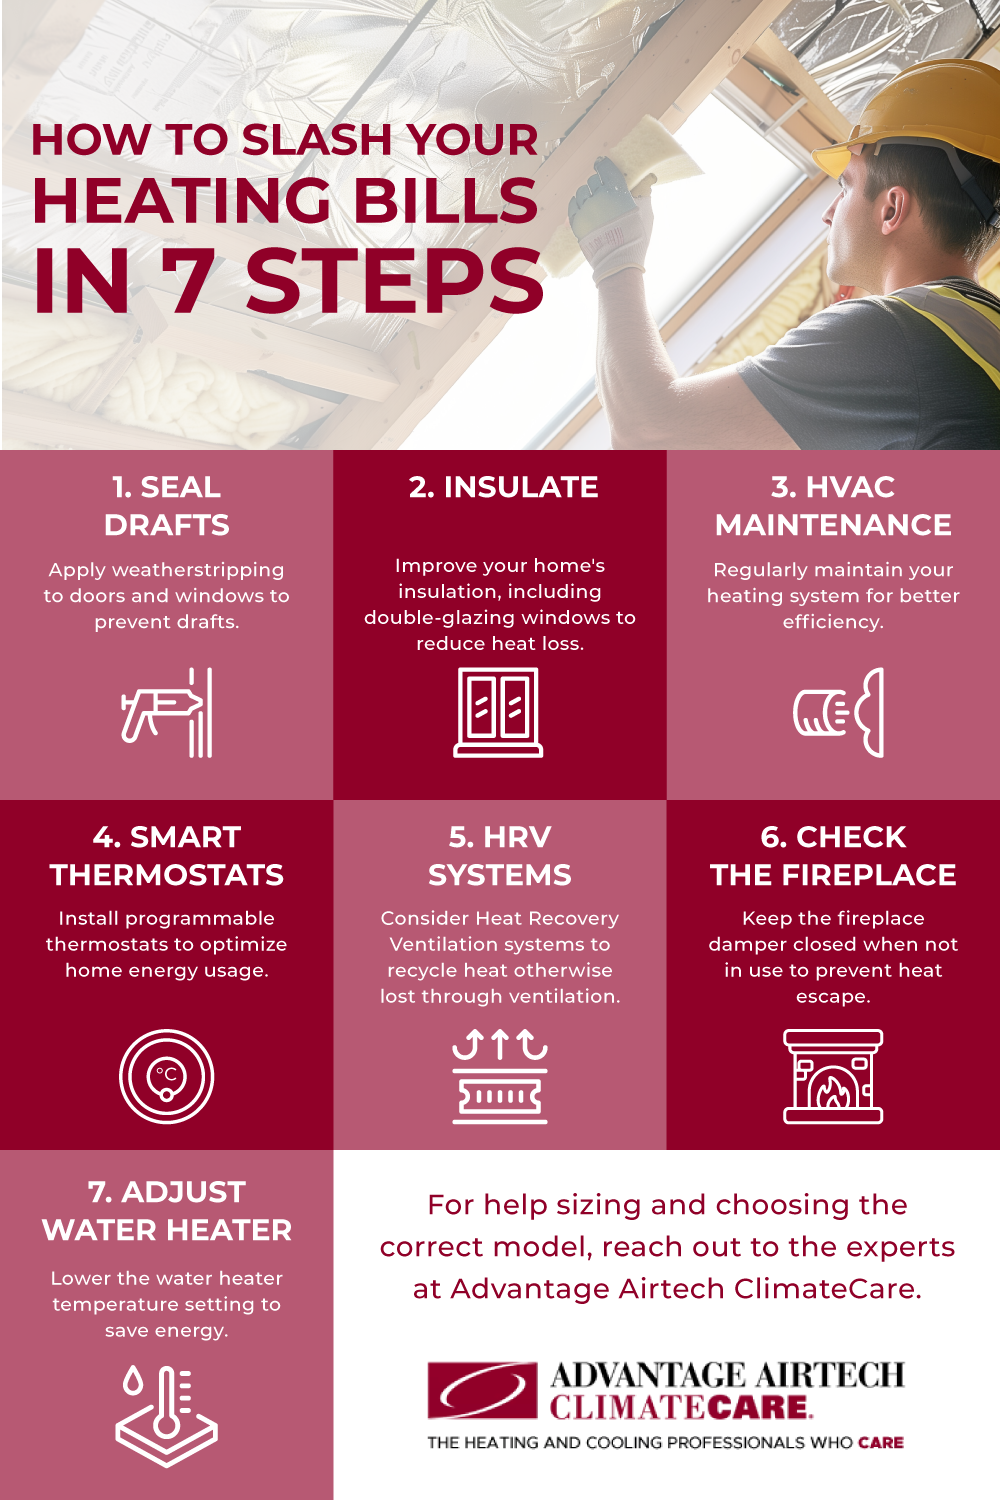 Winter's Coming: How to Slash Your Heating Bills in 7 Steps Infographic